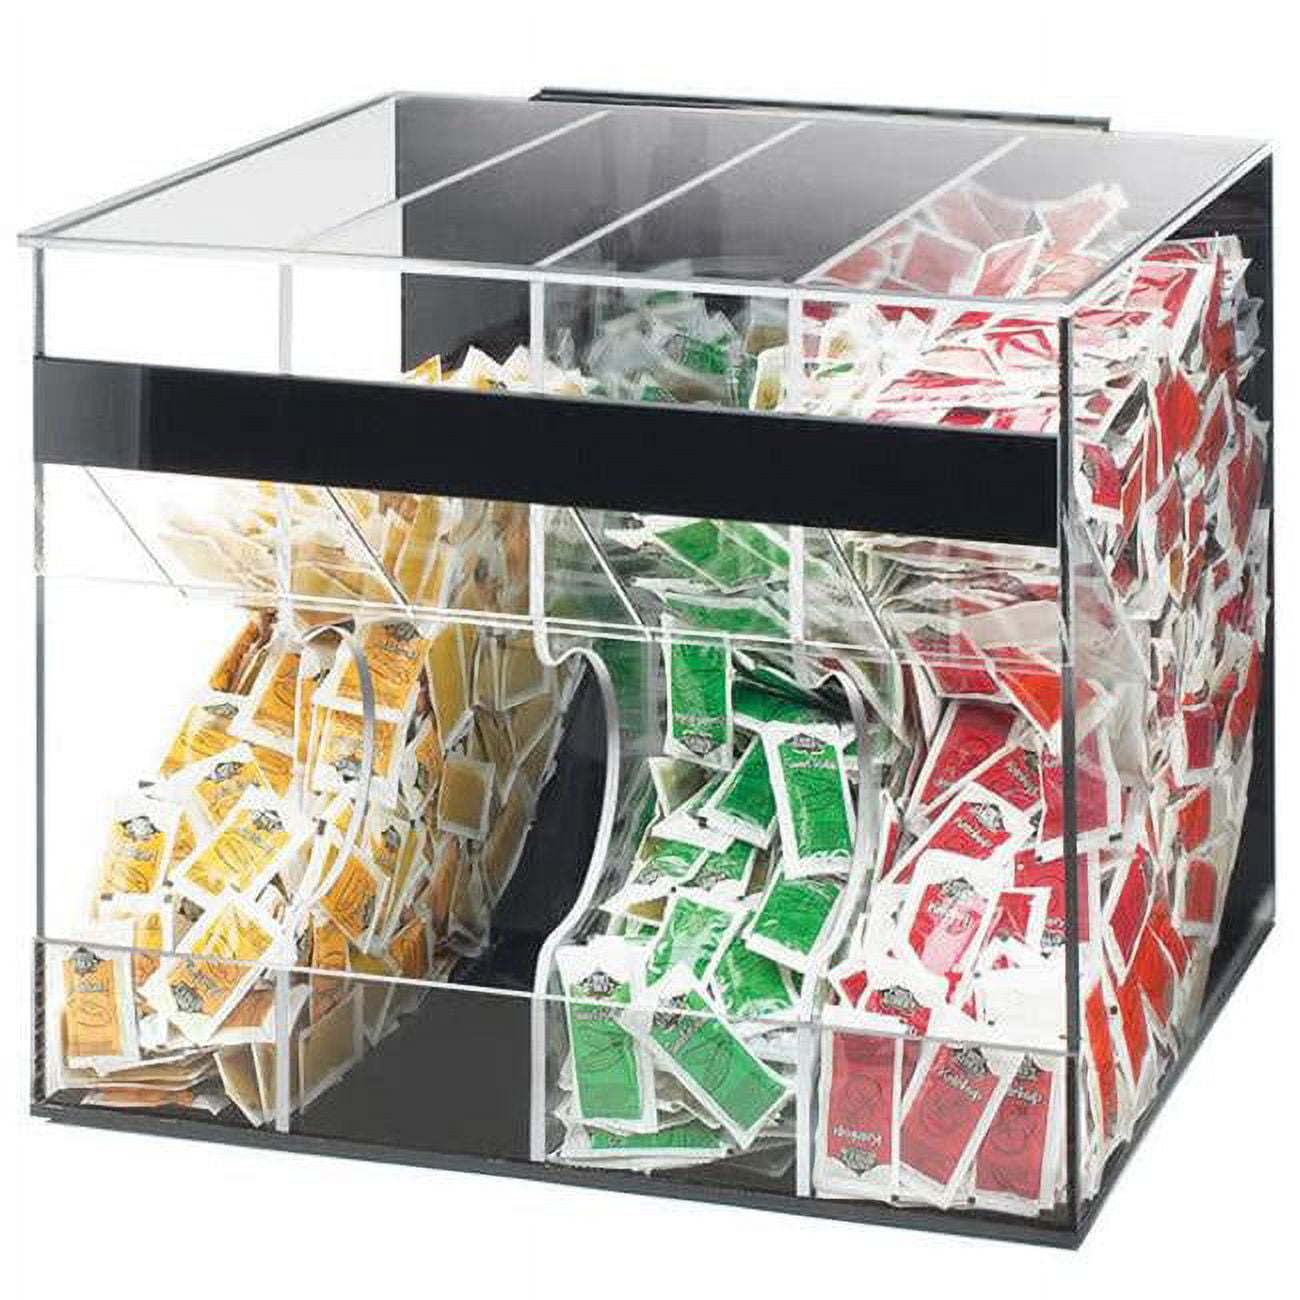 866 High Volume 4 Section Condiment Packet Dispenser - Clear